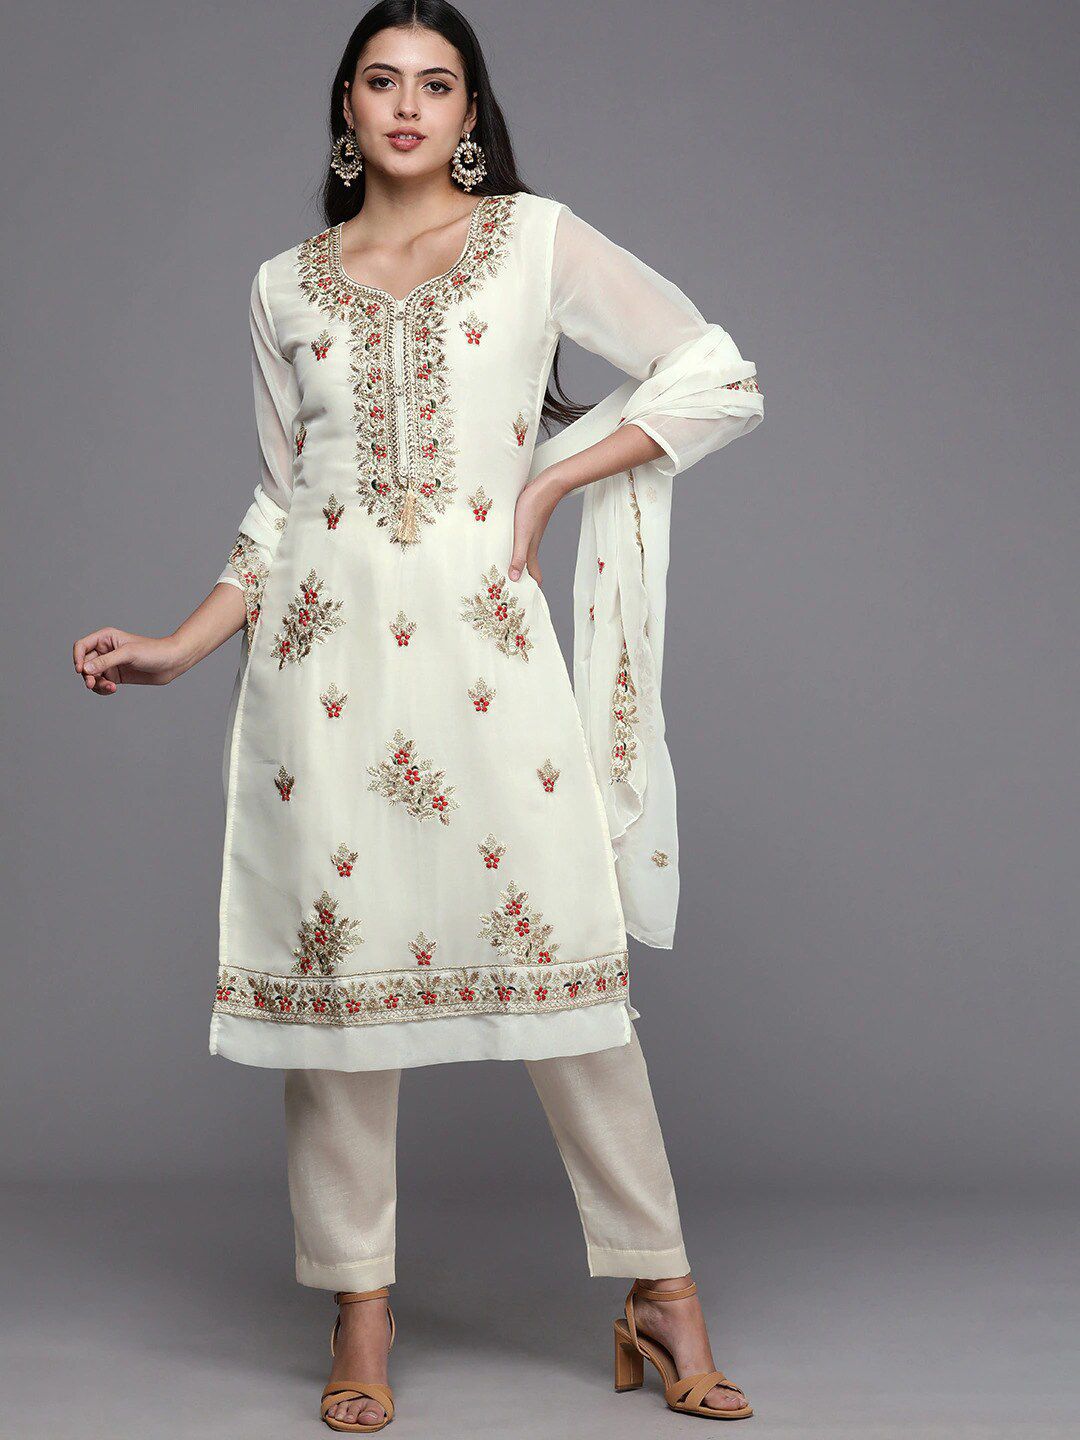 KALINI White & Gold-Toned Embroidered Unstitched Dress Material Price in India